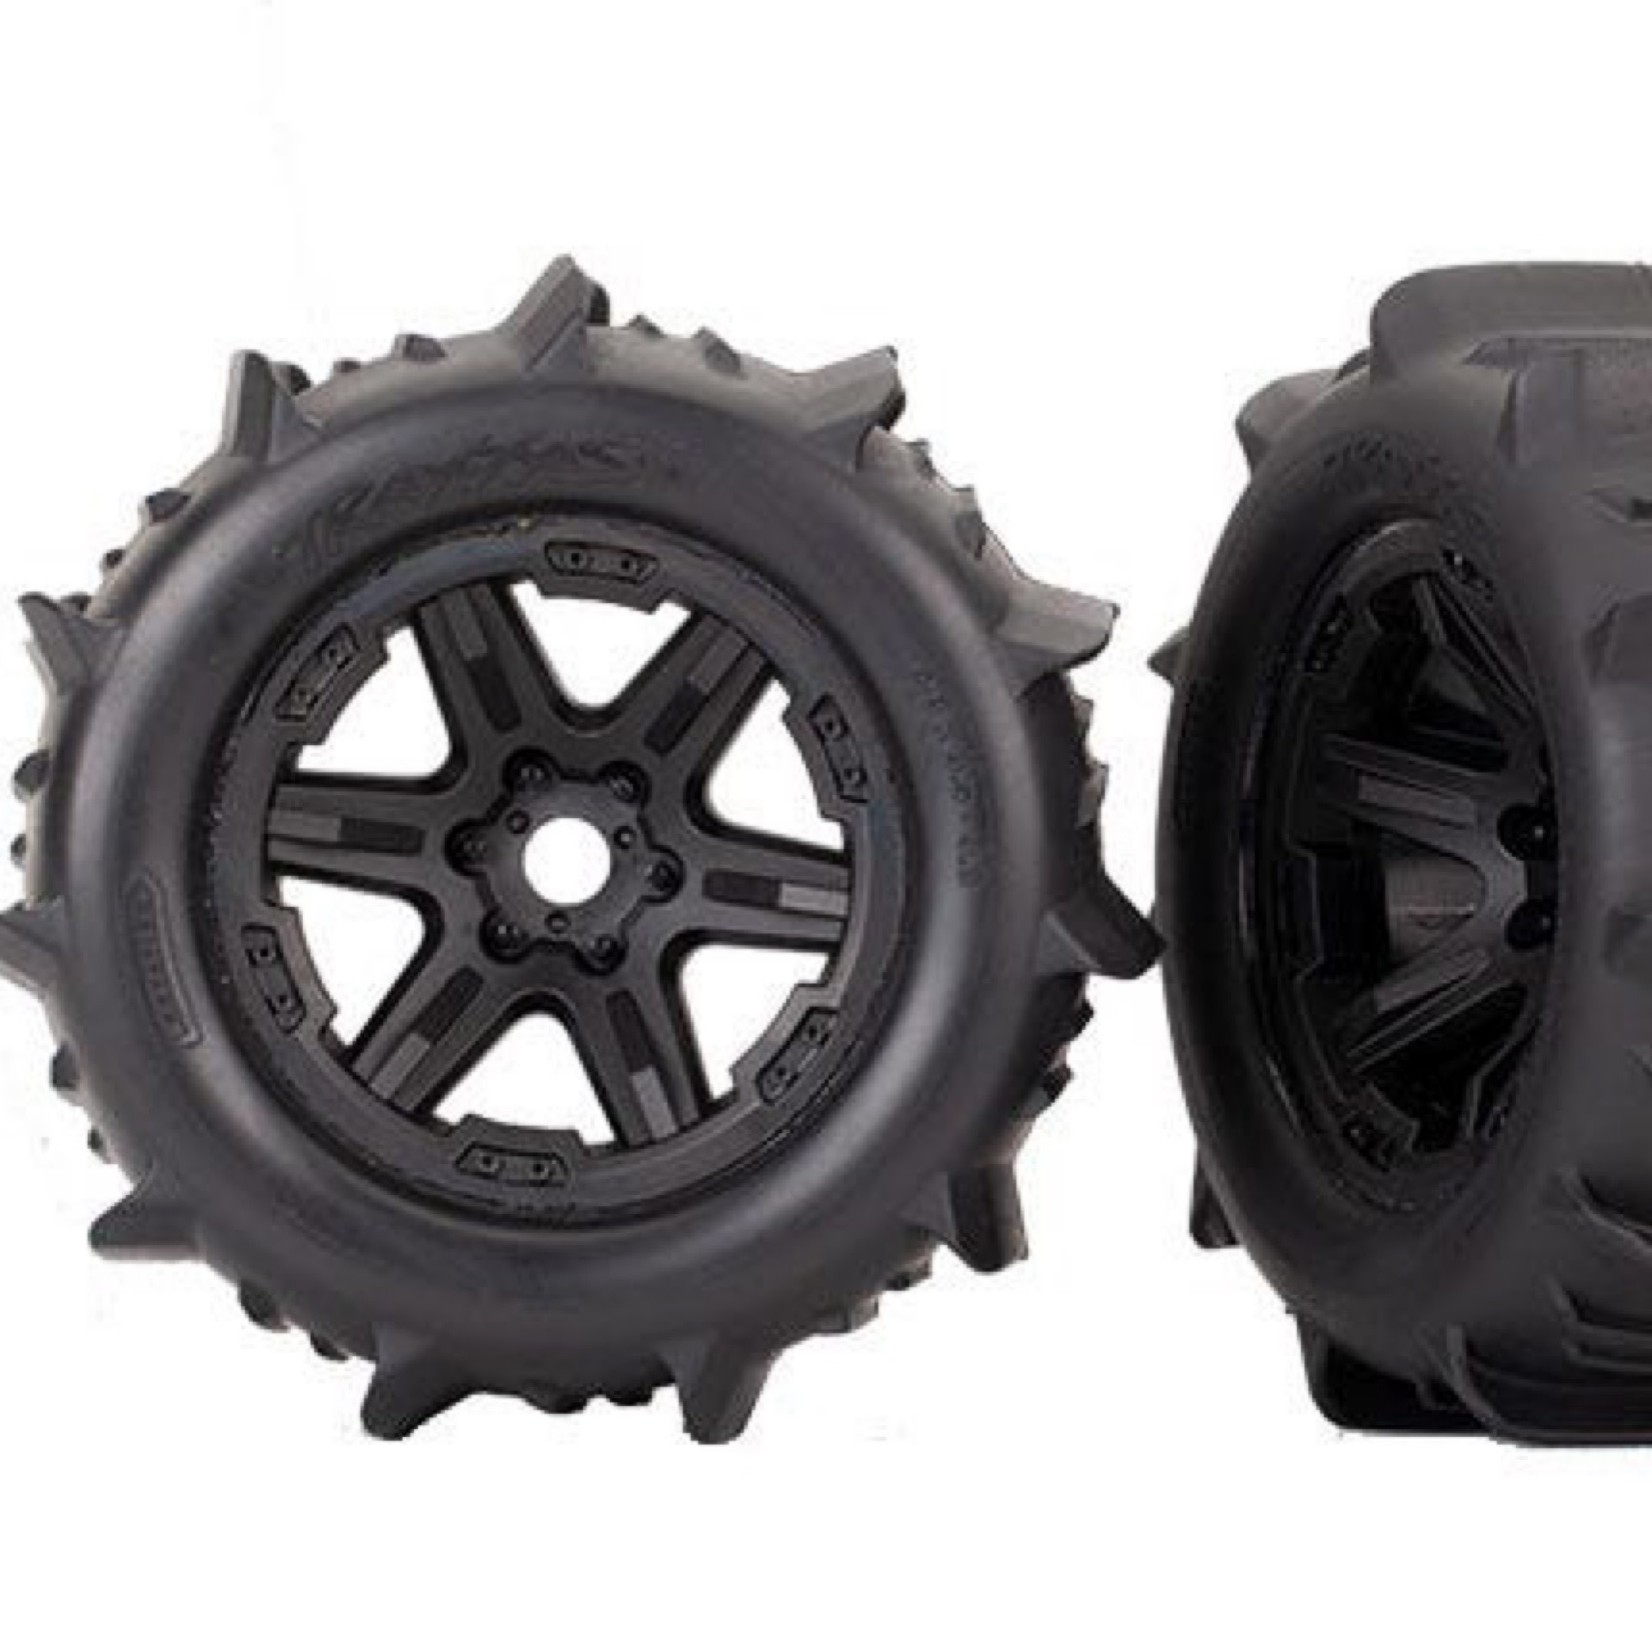 Traxxas Traxxas Paddle Tires 3.8" Pre-Mounted w/Monster Truck Wheels (Black) (Standard) #8674